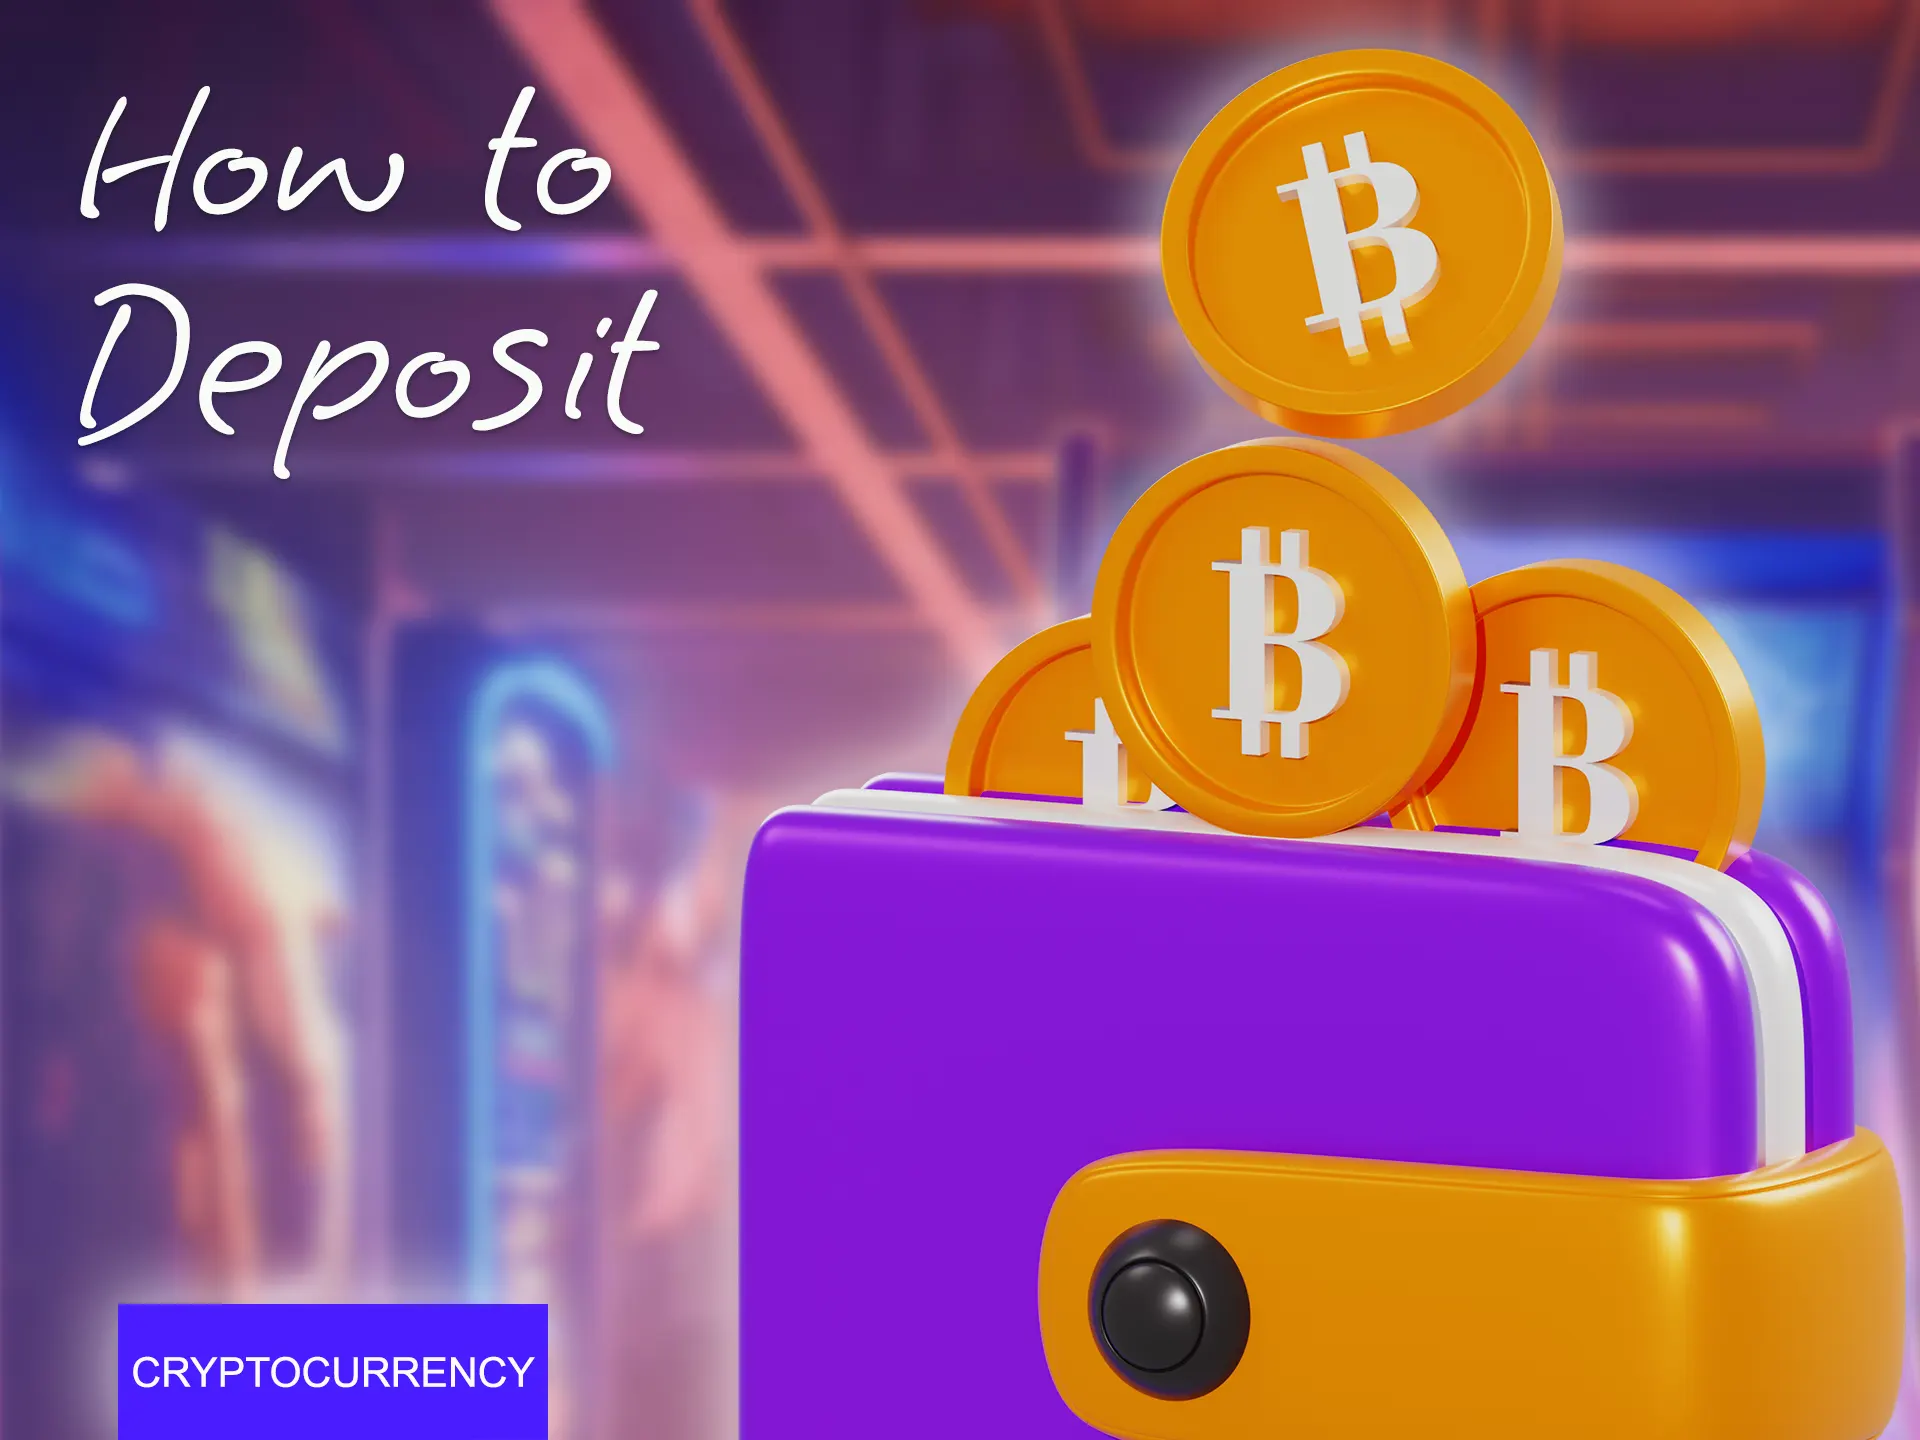 Check out our guide to making a cryptocurrency deposit.